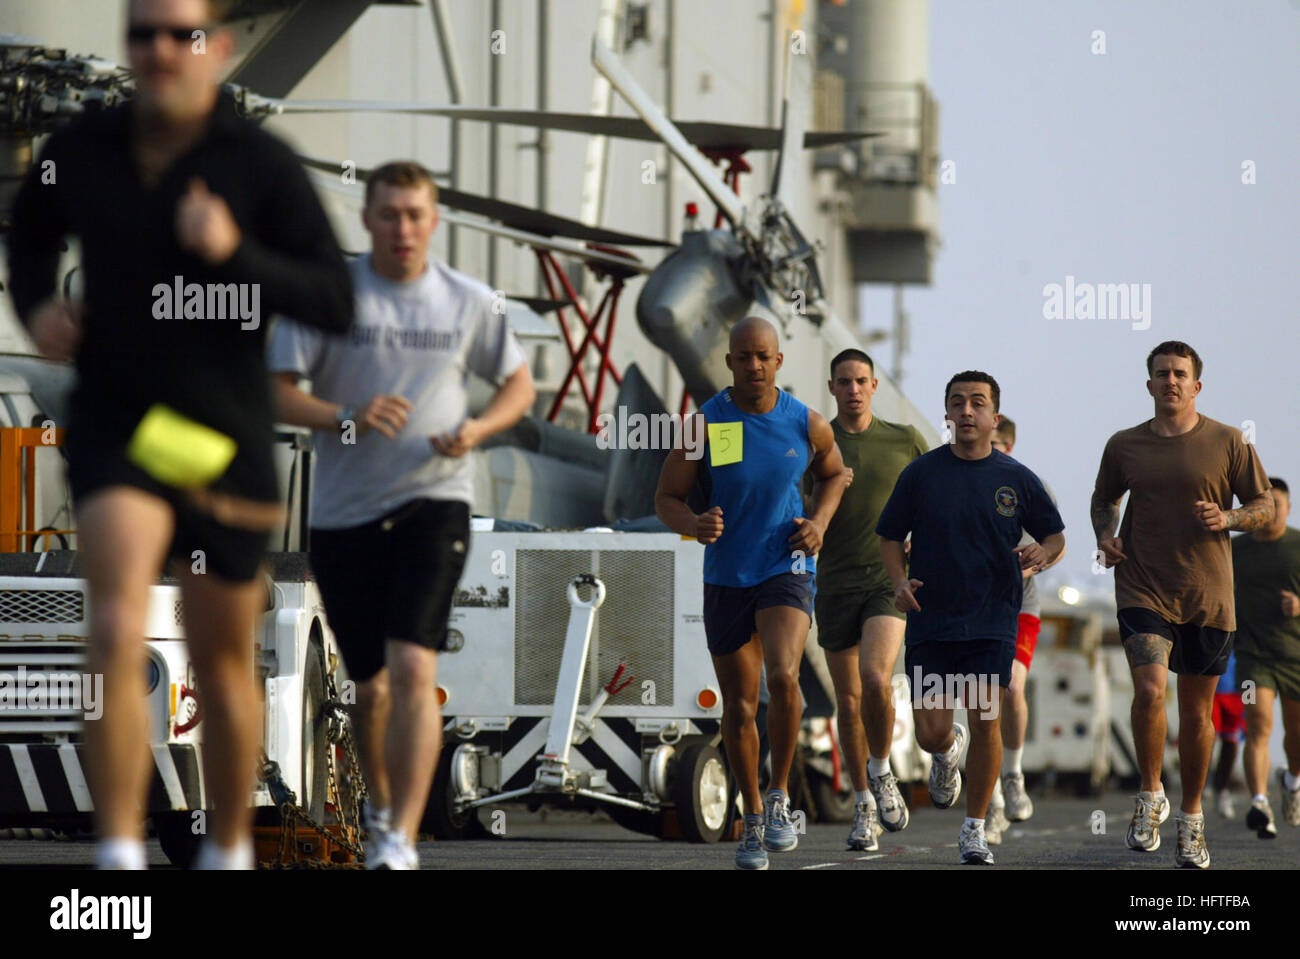 USS ESSEX (LHD 2), At Sea -- Master Sgt. Dervin Deryck (left) Lt. Javier Agrac (middle) and Explosive Ordnance Disposal 1st Class  Nick Matics (right) stride side-by-side during a five-kilometer fun run held by Moral, Welfare and Recreation Feb. 10, 2007. Essex is the Navy's only forward deployed multi-purpose amphibious assault ship and is the flagship for the Essex Amphibious Readiness Group (ARG) operating from Sasebo, Japan. (Official U.S. Navy photo by Mass Communication Specialist 3rd Class Jhoan M. Montolio) US Navy 070211-N-4207M-004 Sailors station aboard the amphibious assault ship U Stock Photo